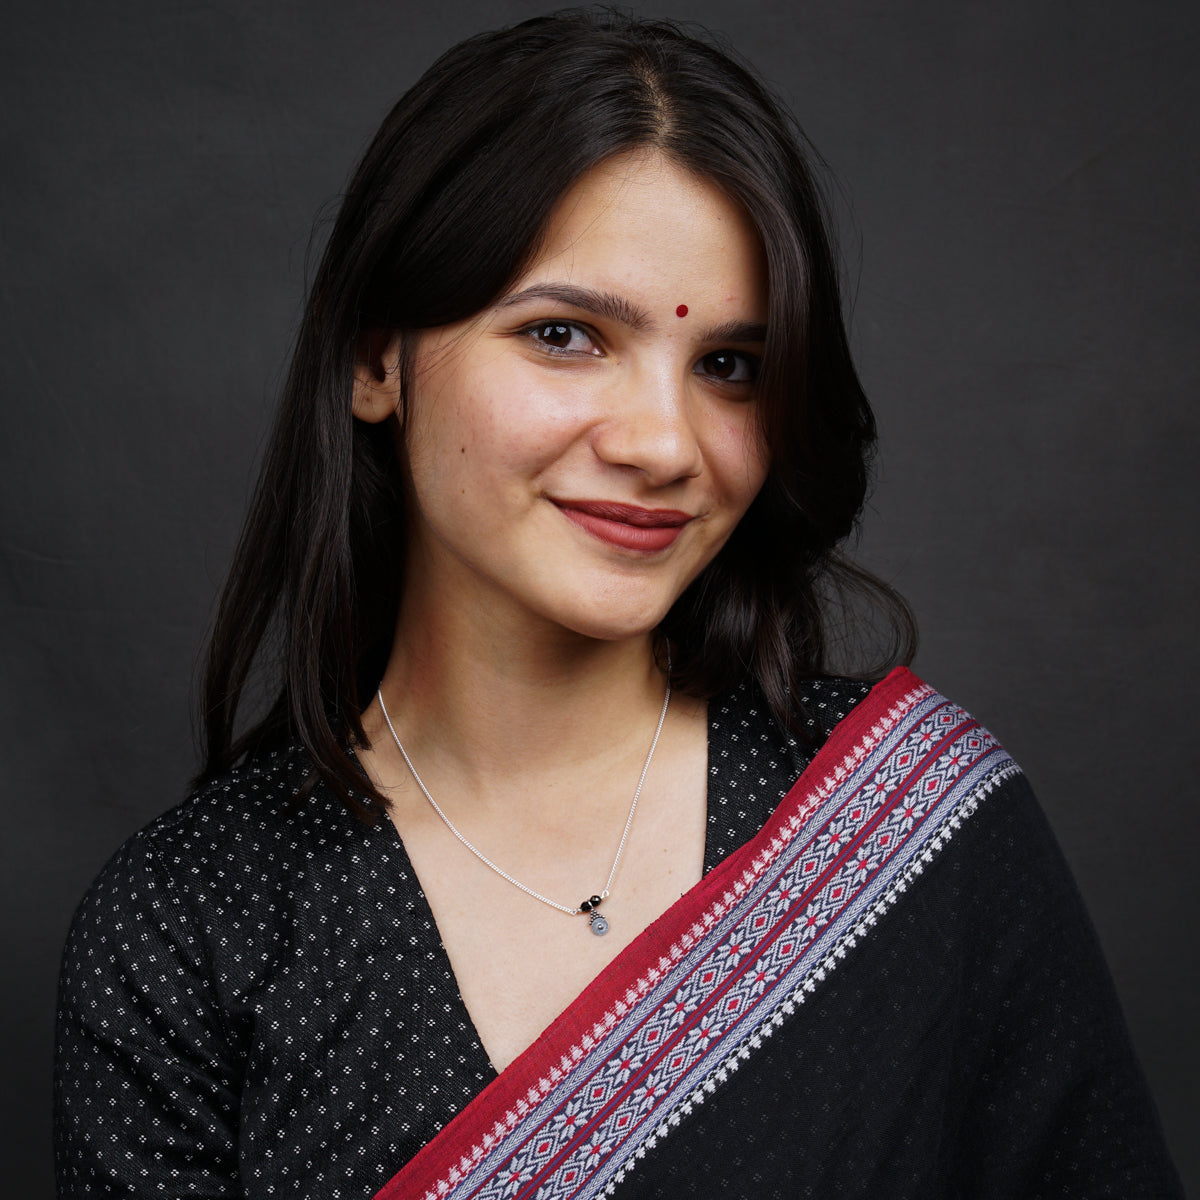 a woman wearing a black and red sari